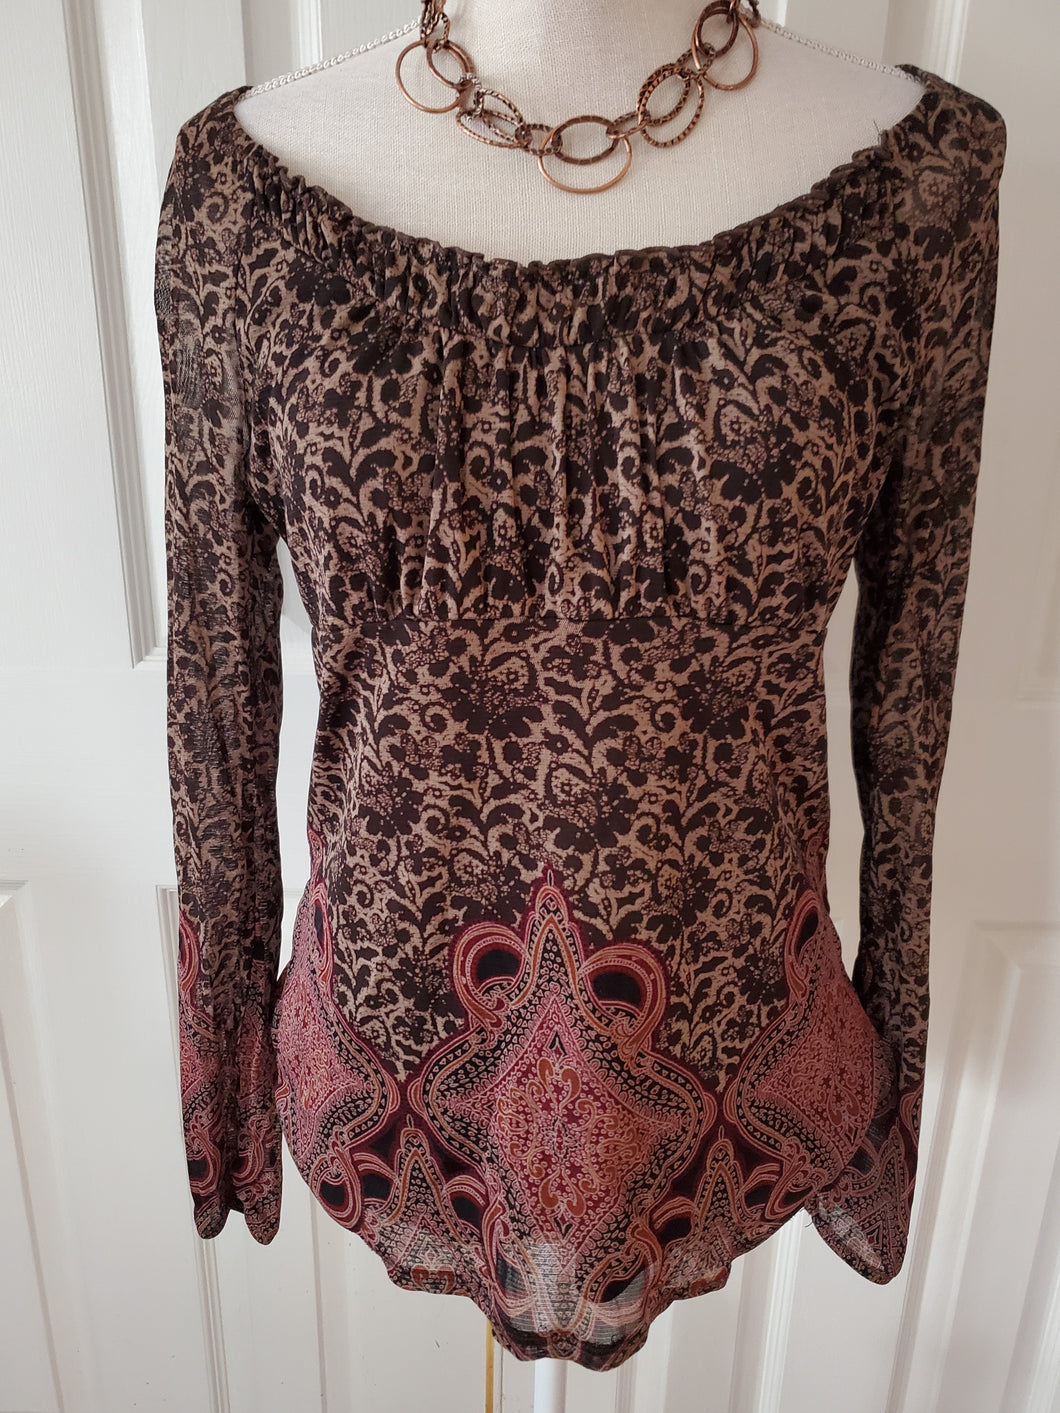 Ladies Long Sleeve Off the Shoulder Top Size Small